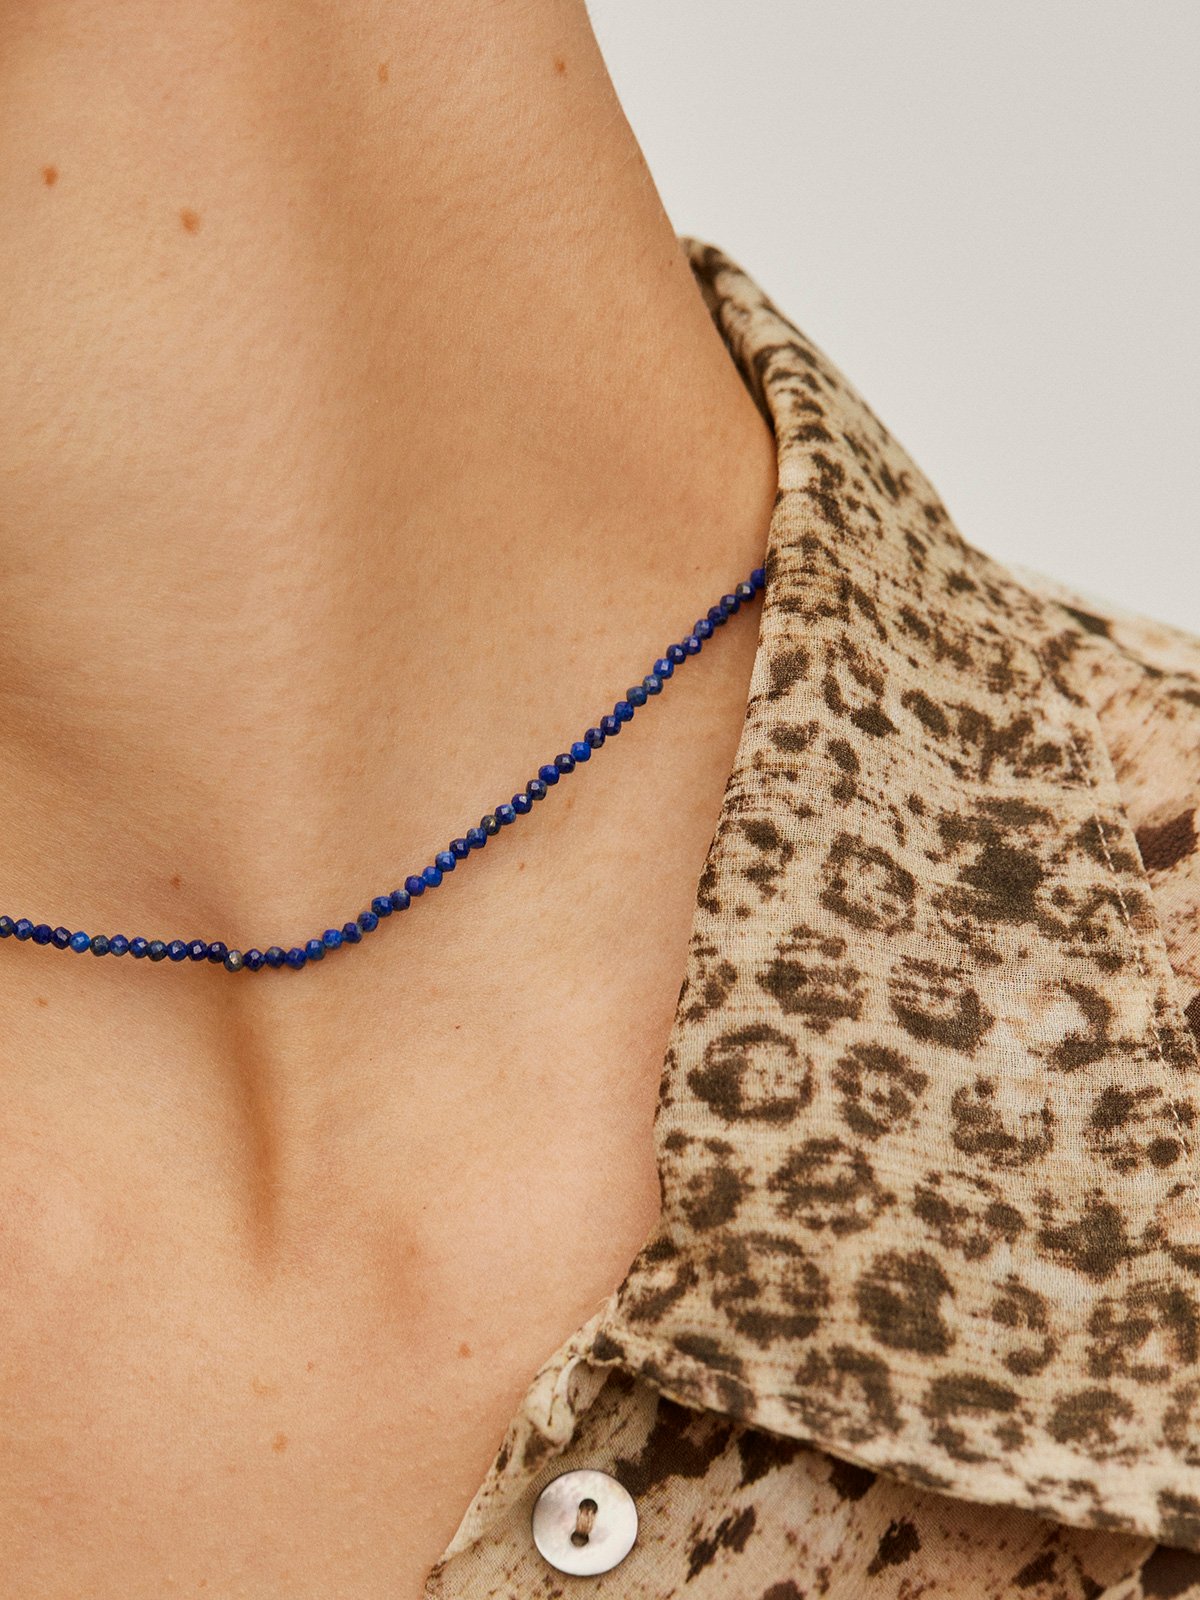 925 Silver necklace bathed in 18K yellow gold with blue lapis lazuli.